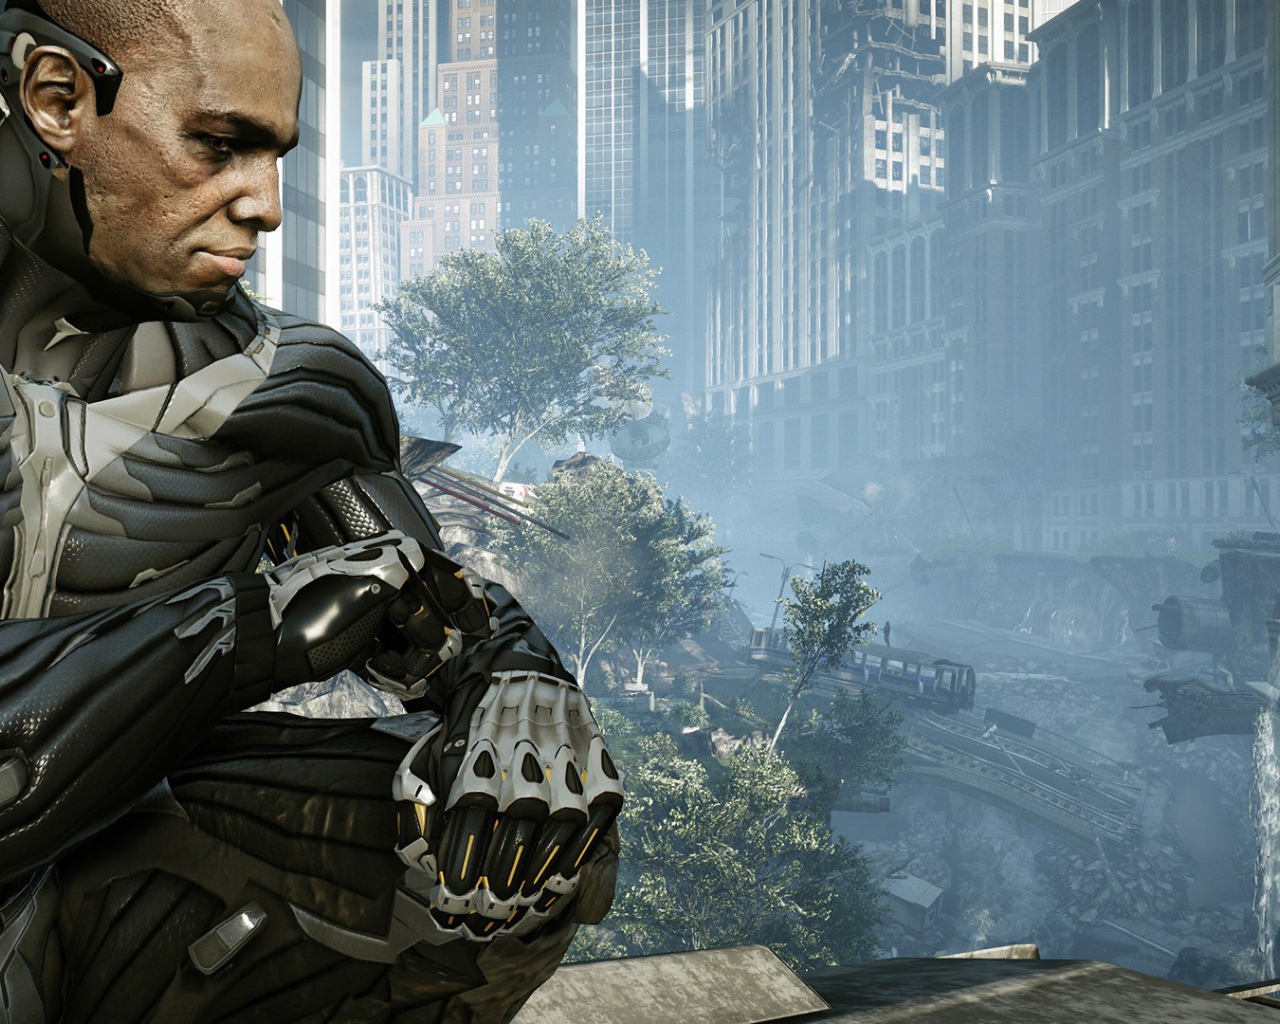 Video game Crysis 2 F.E.A.R.